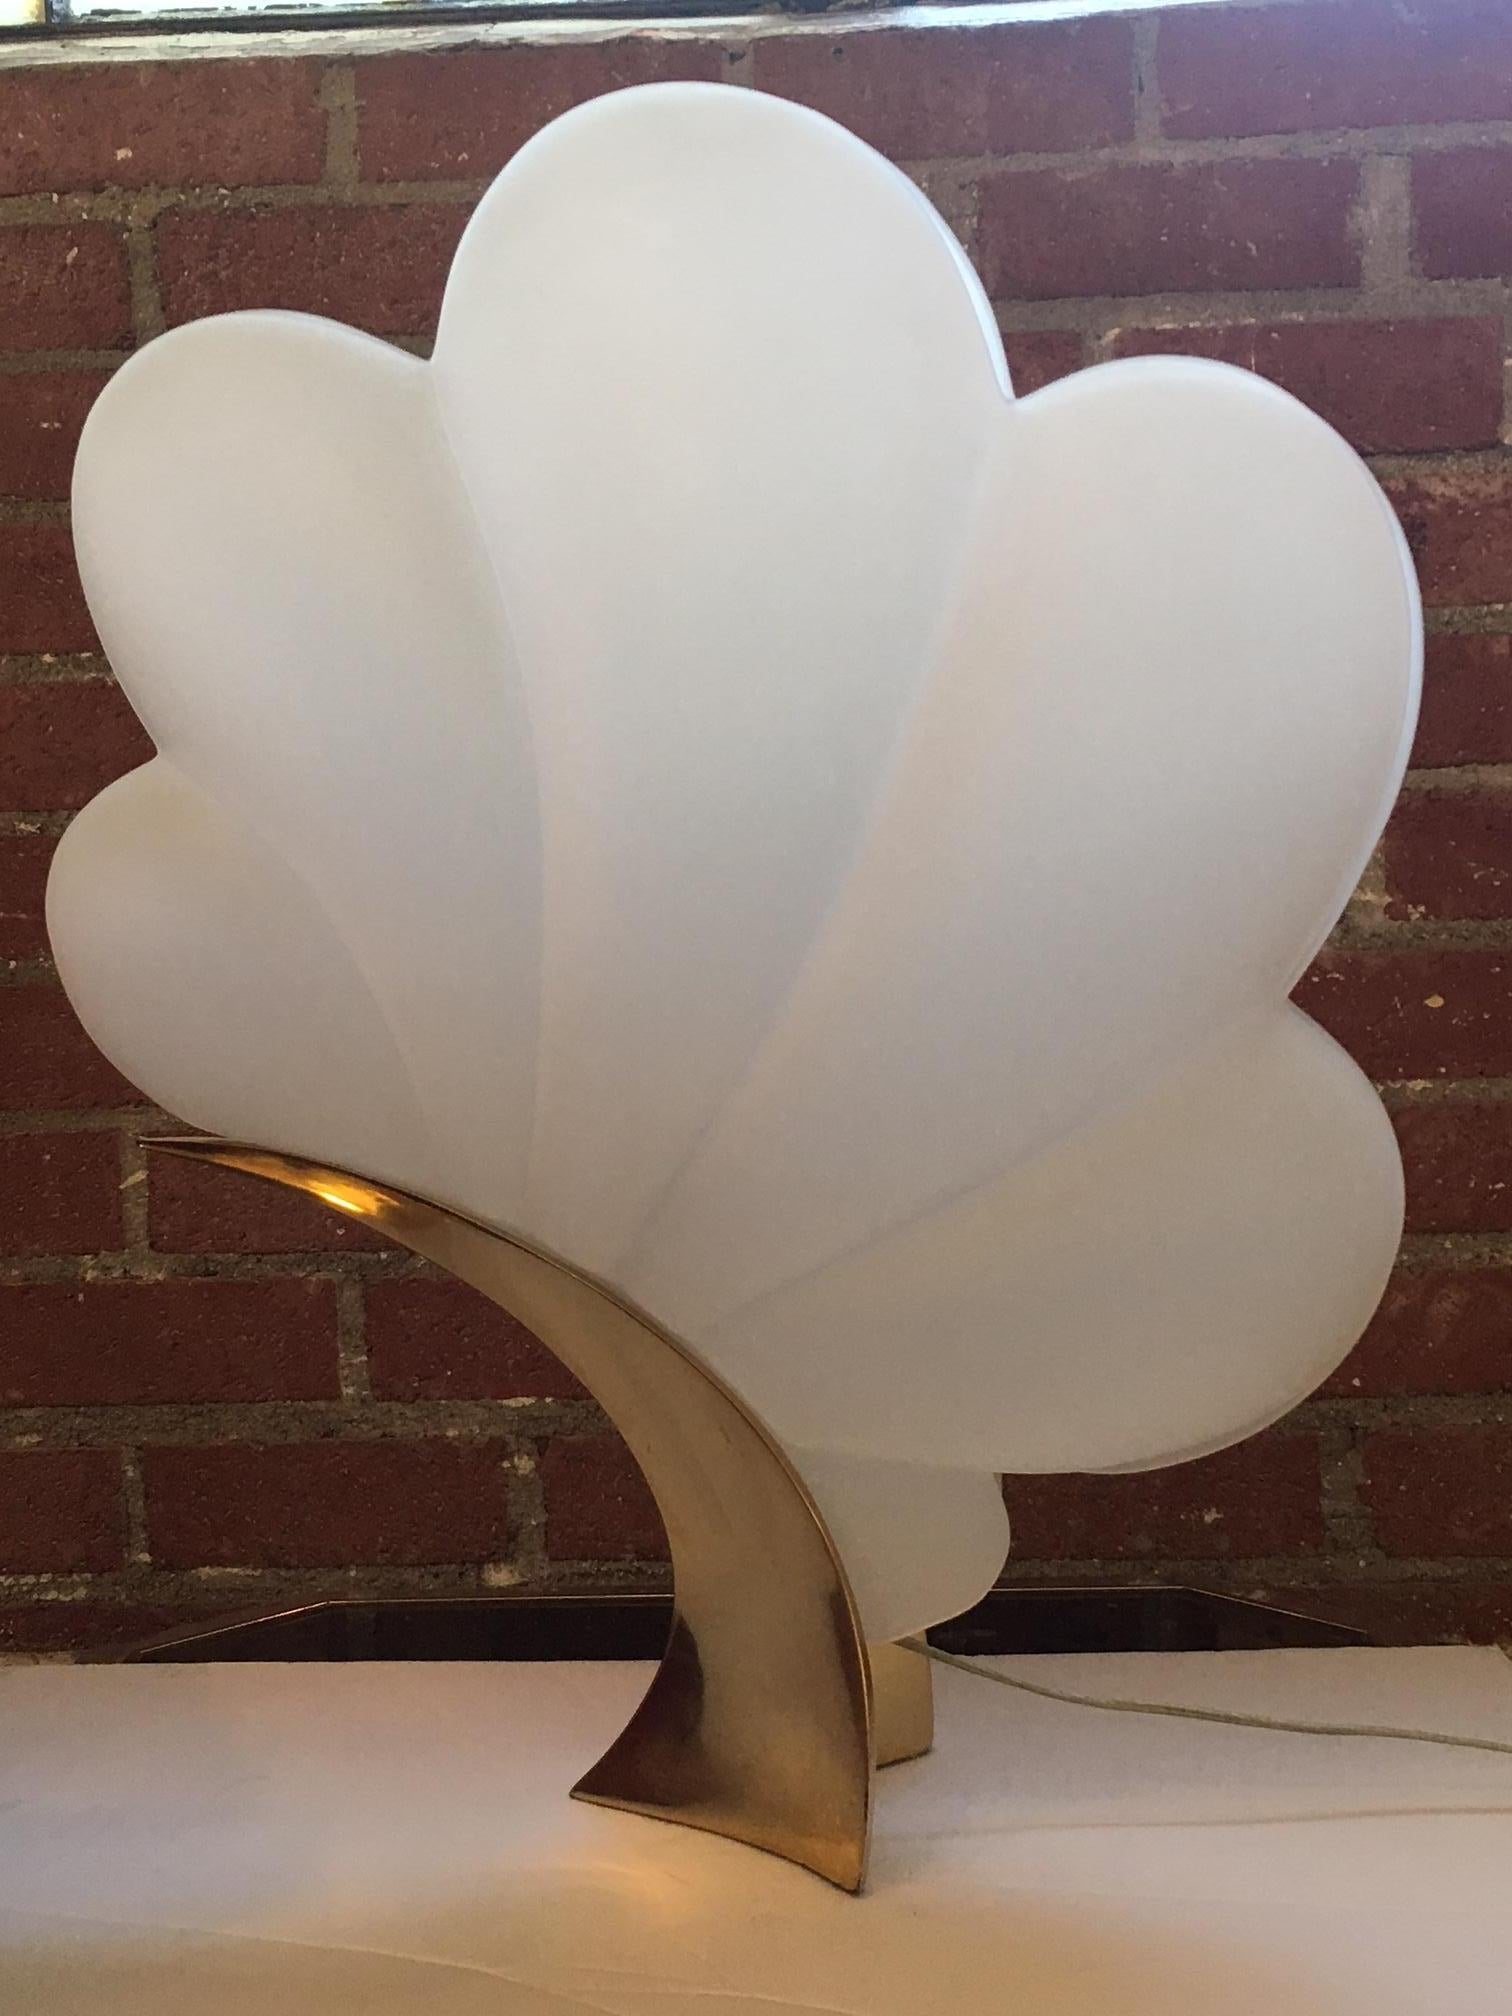 Rougier accent table lamp with brass base. The shell part is made of frosted acrylic. Includes manufacturer's original label.